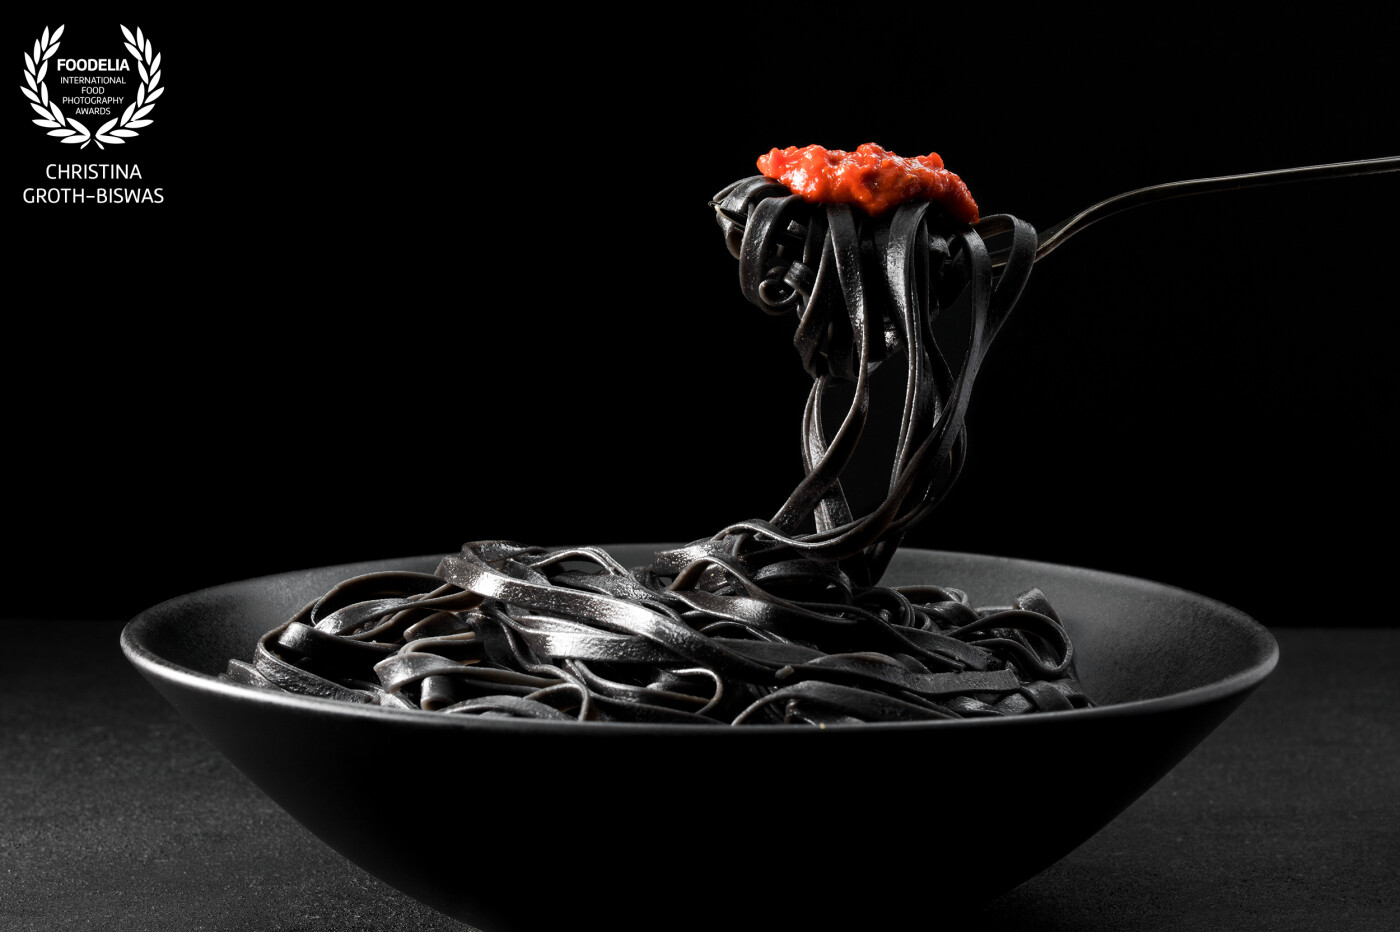 Squid ink linguine with hot chilli pesto.<br />
A black subject on a black background is always a bit tricky to capture, hence I used artificial light which gives better control. I also added a strong contrasting colour which not only works on the picture but also added a lot of flavour to the final dish.